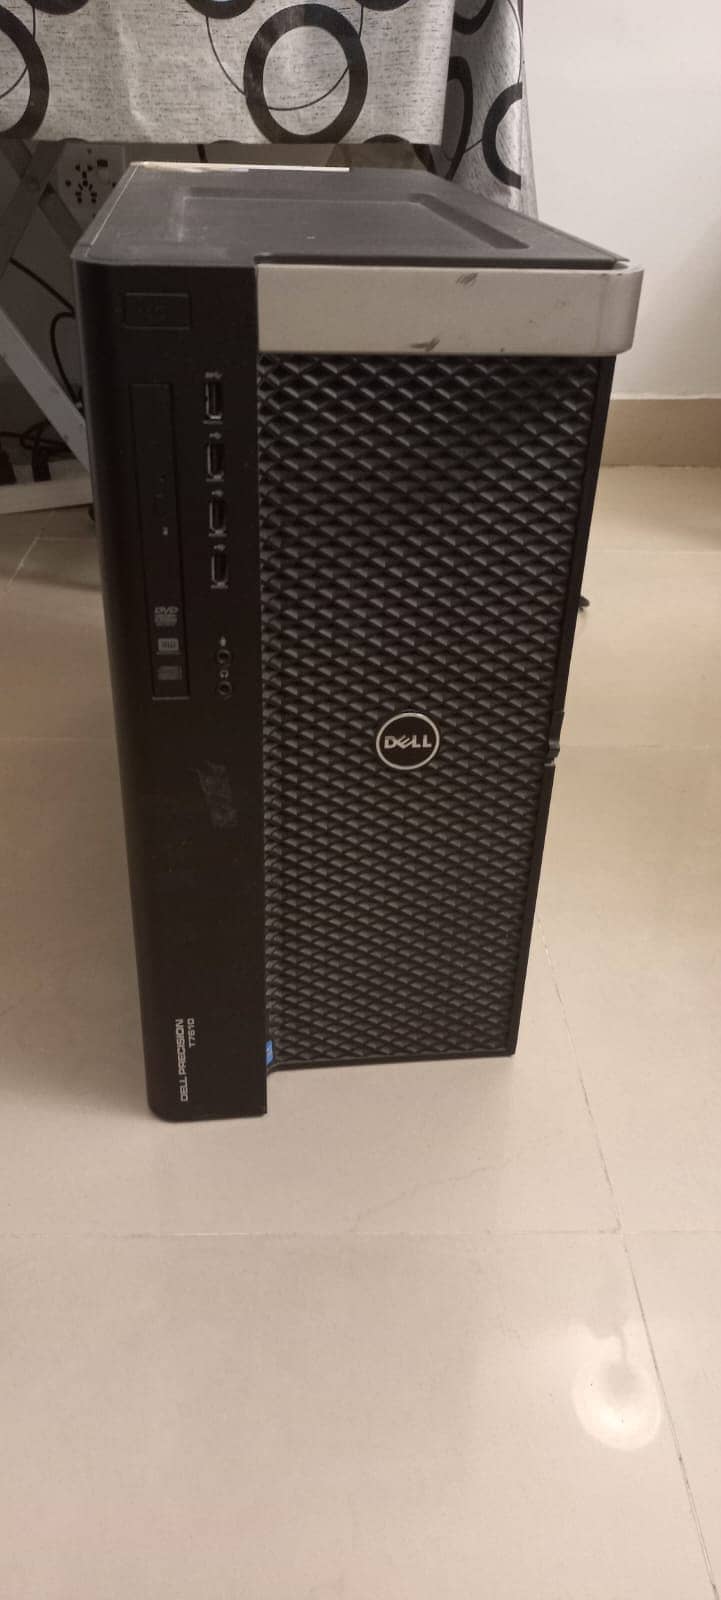 Dell T7610 Workstation High-end machine for Gaming and Animation! 1